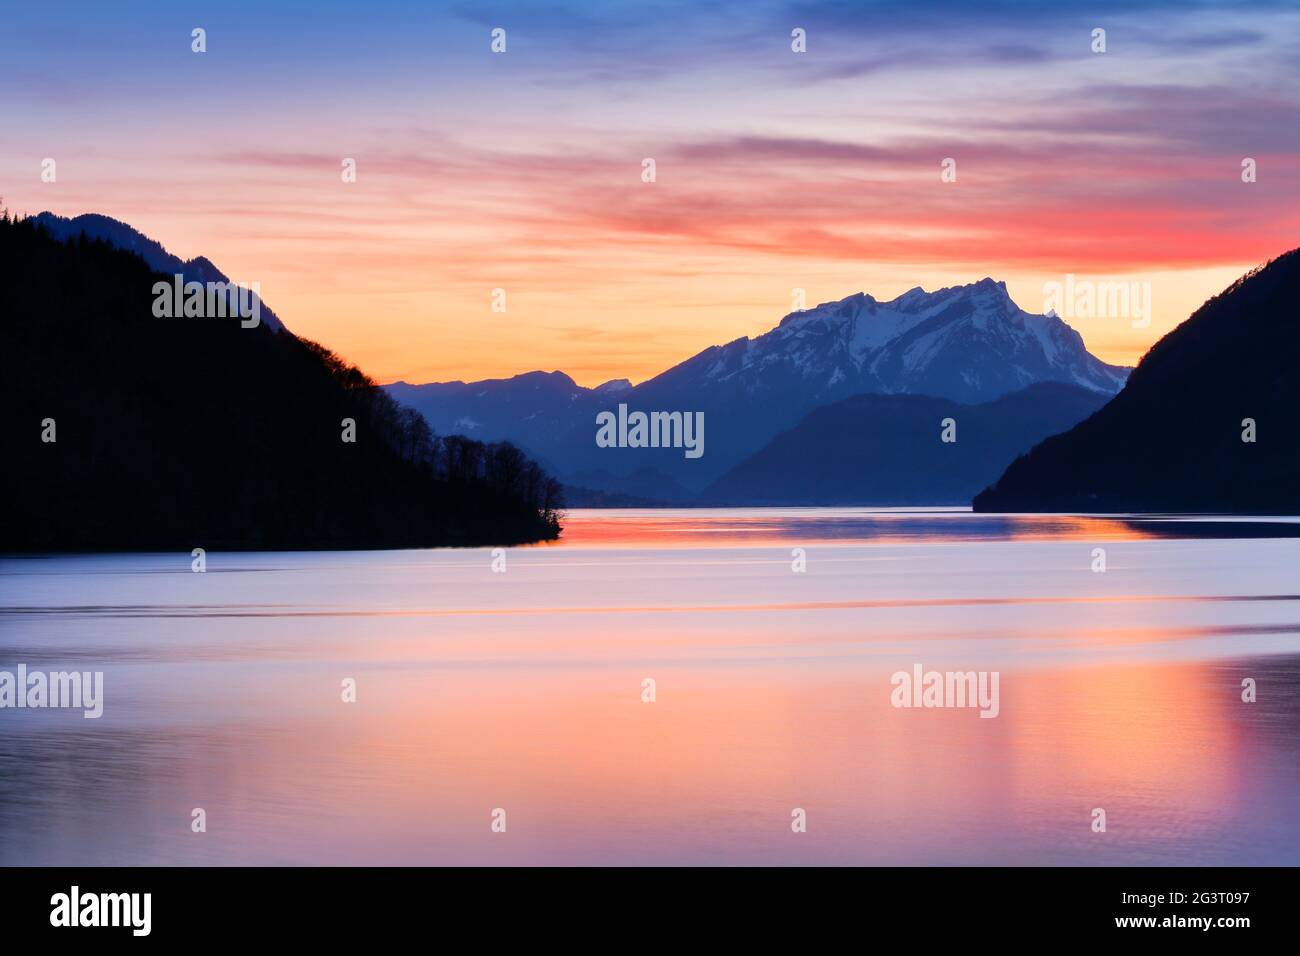 lake with mountain scenery, vista from Brunnen over Lake Lucerne at sunset, Mount Pilatus in the background, Switzerland Stock Photo